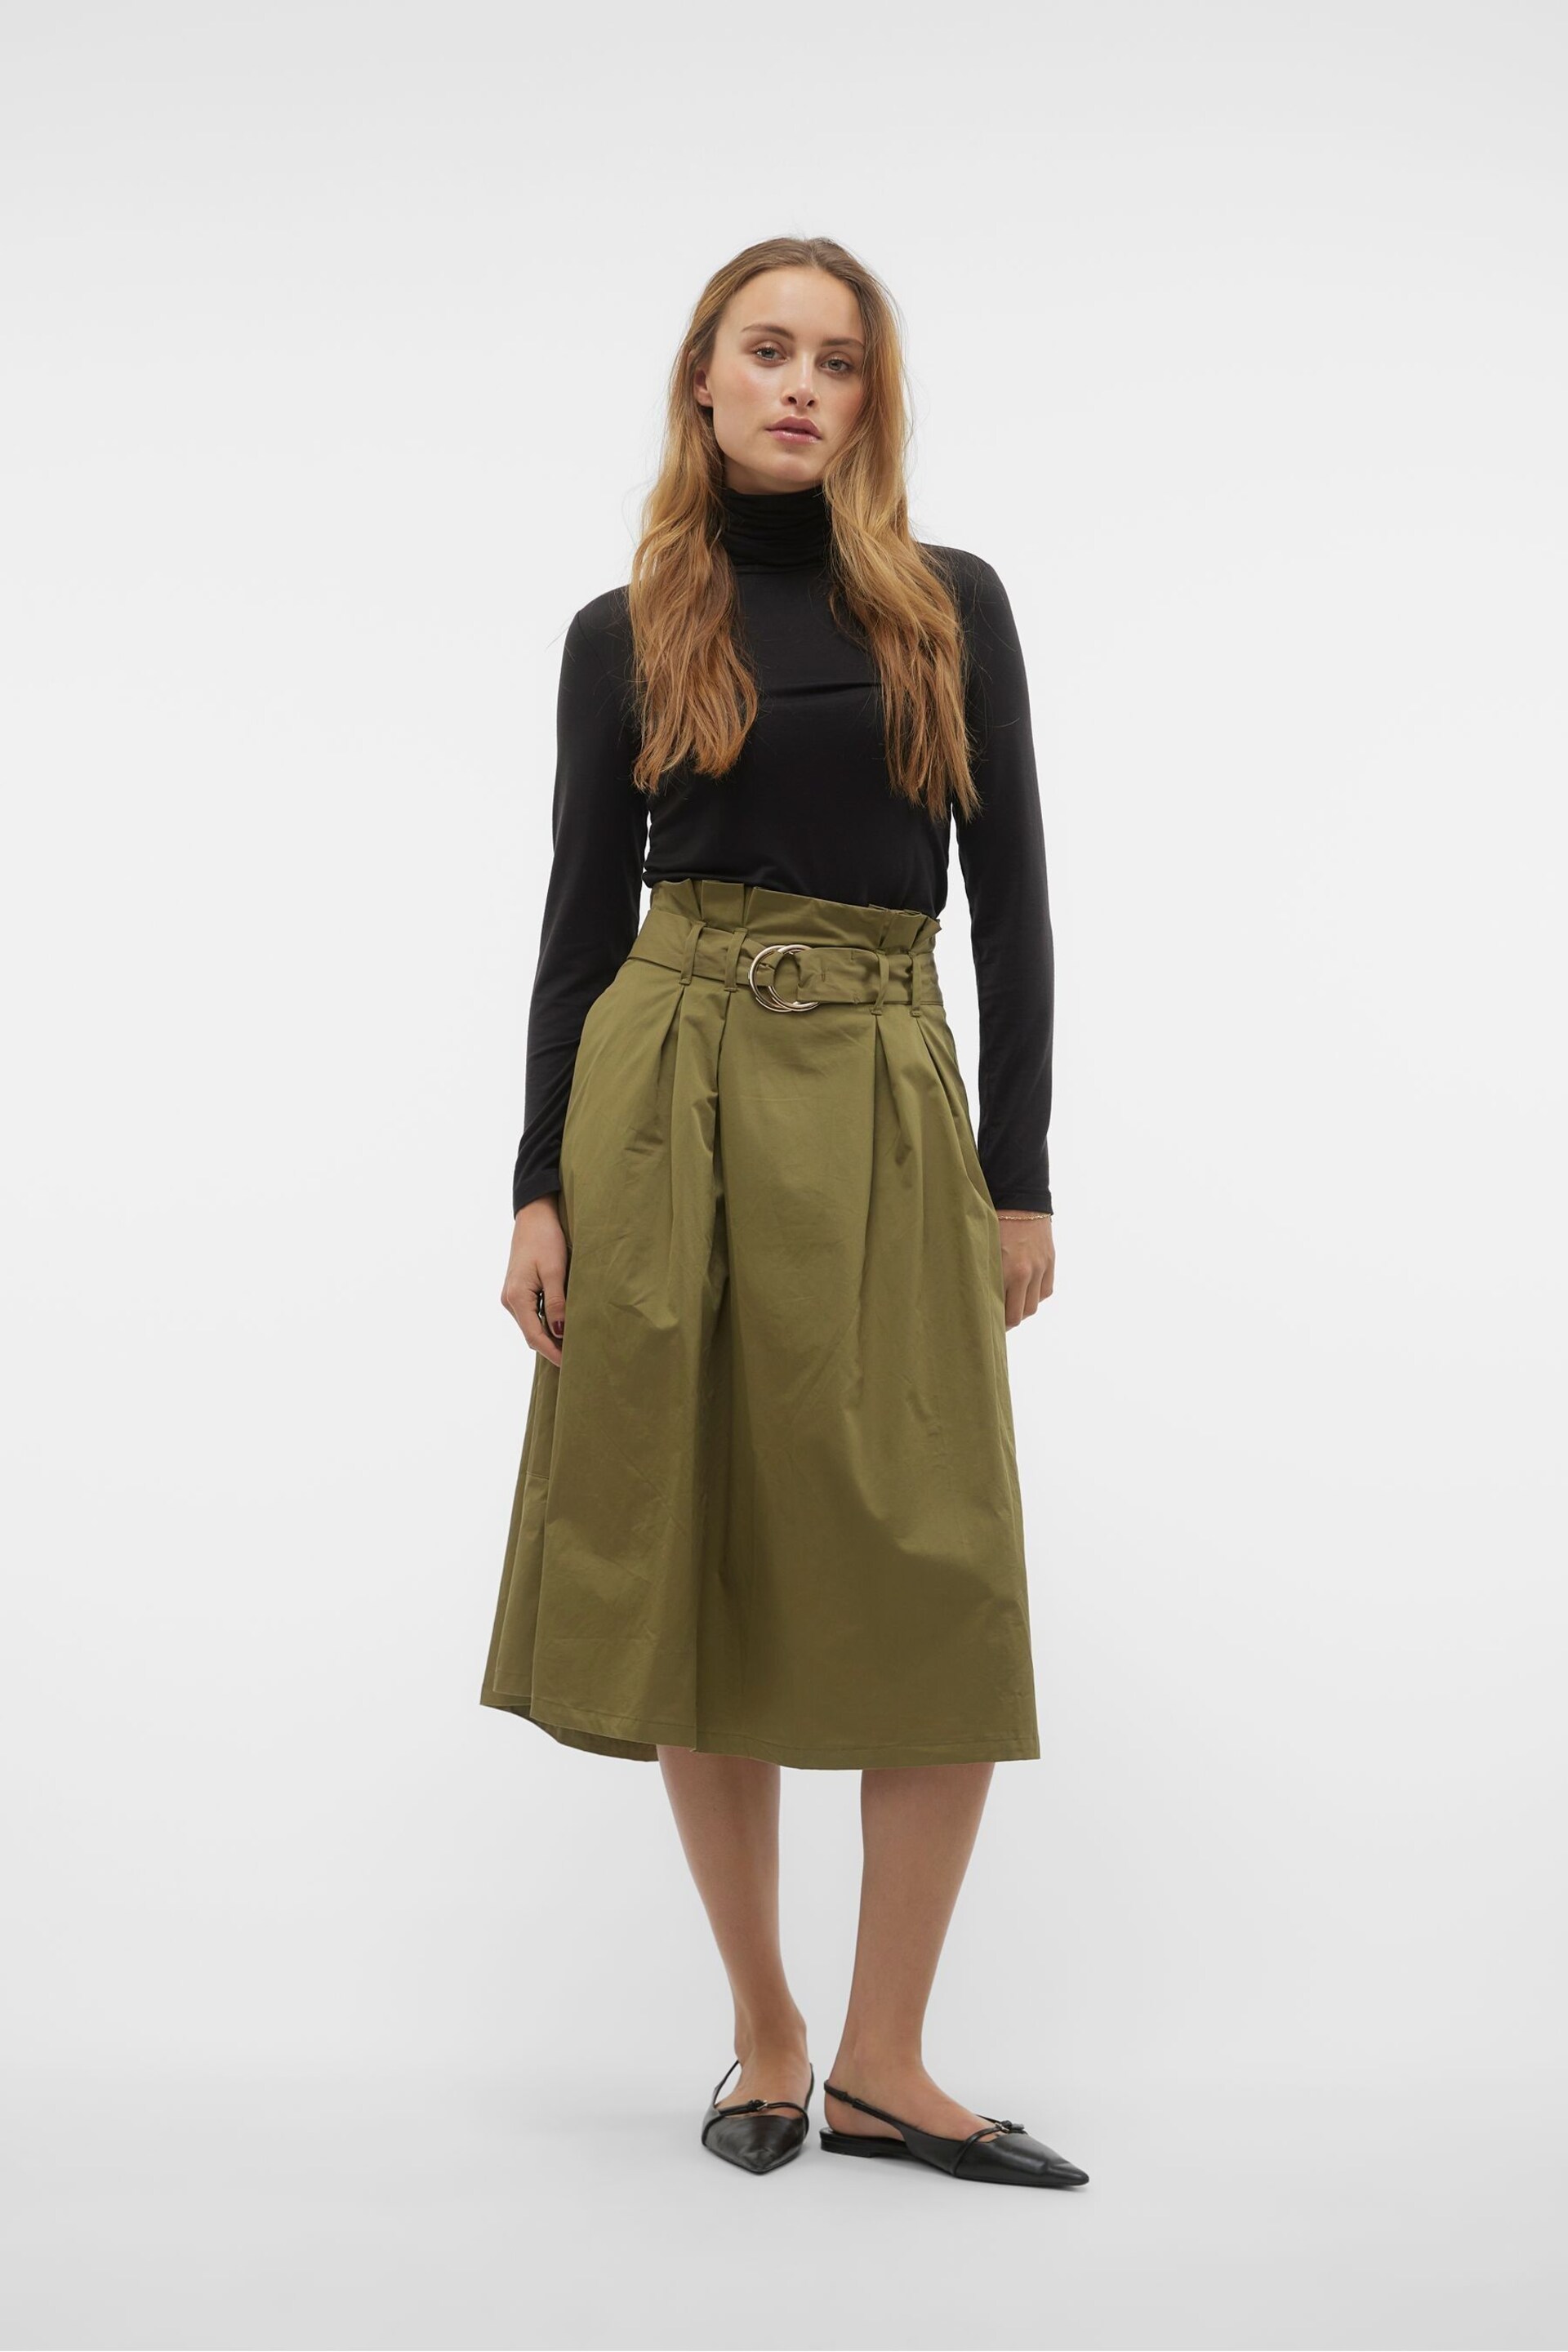 VERO MODA Green Belted A-Line Cargo Utility Midi Skirt - Image 1 of 4